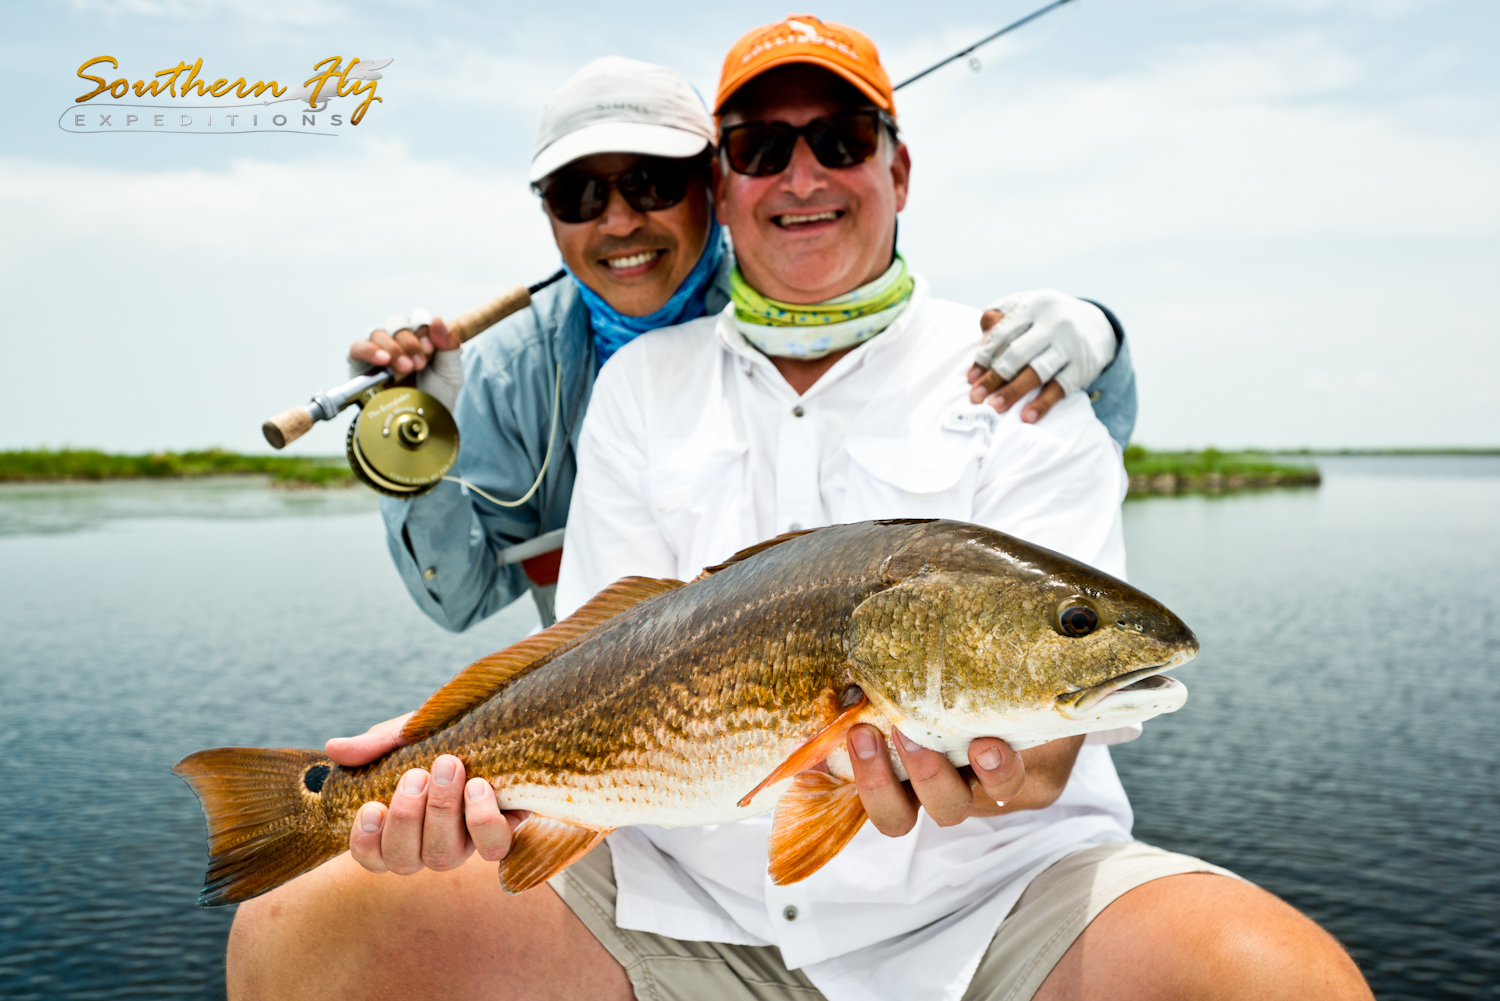 Photos of Fly Fishing with Friends and Southern Fly Expeditions 